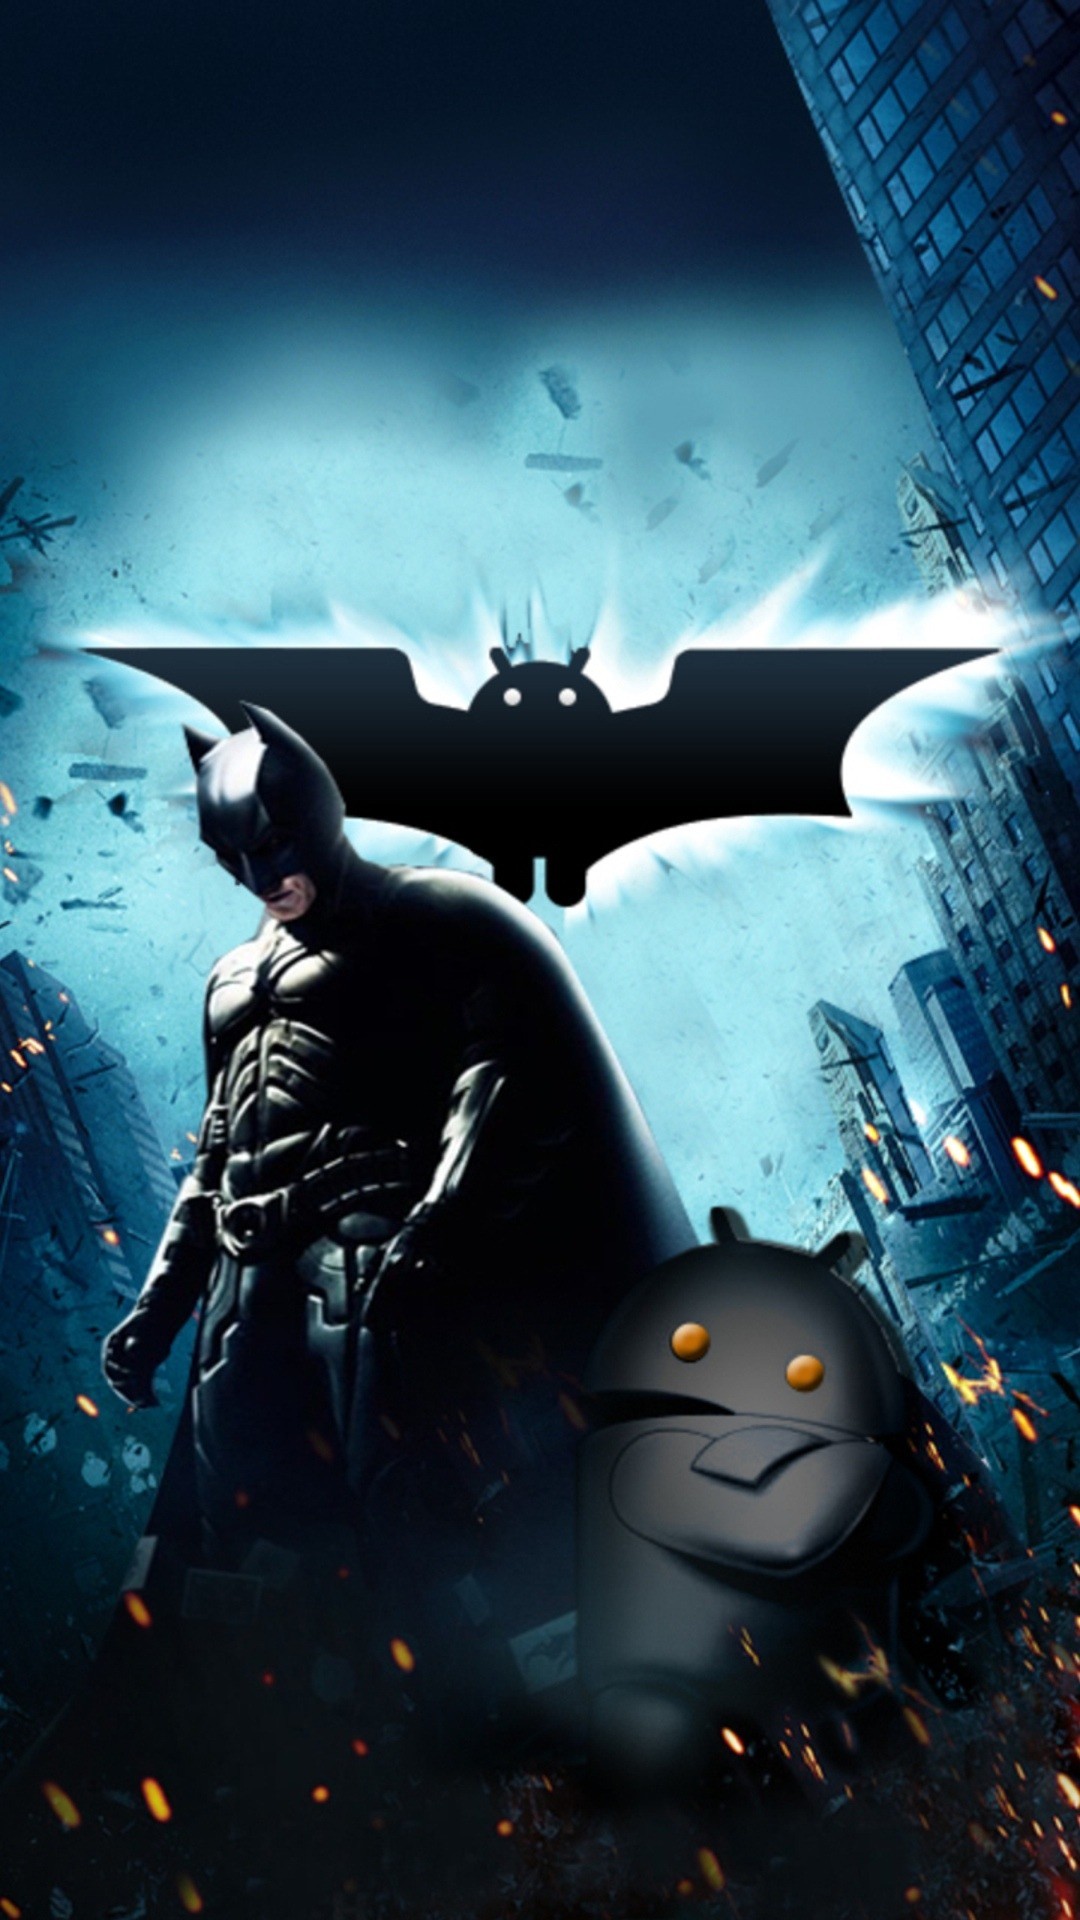 1080x1920 1000+ ideas about Batman Wallpapers For Mobile on Pinterest .